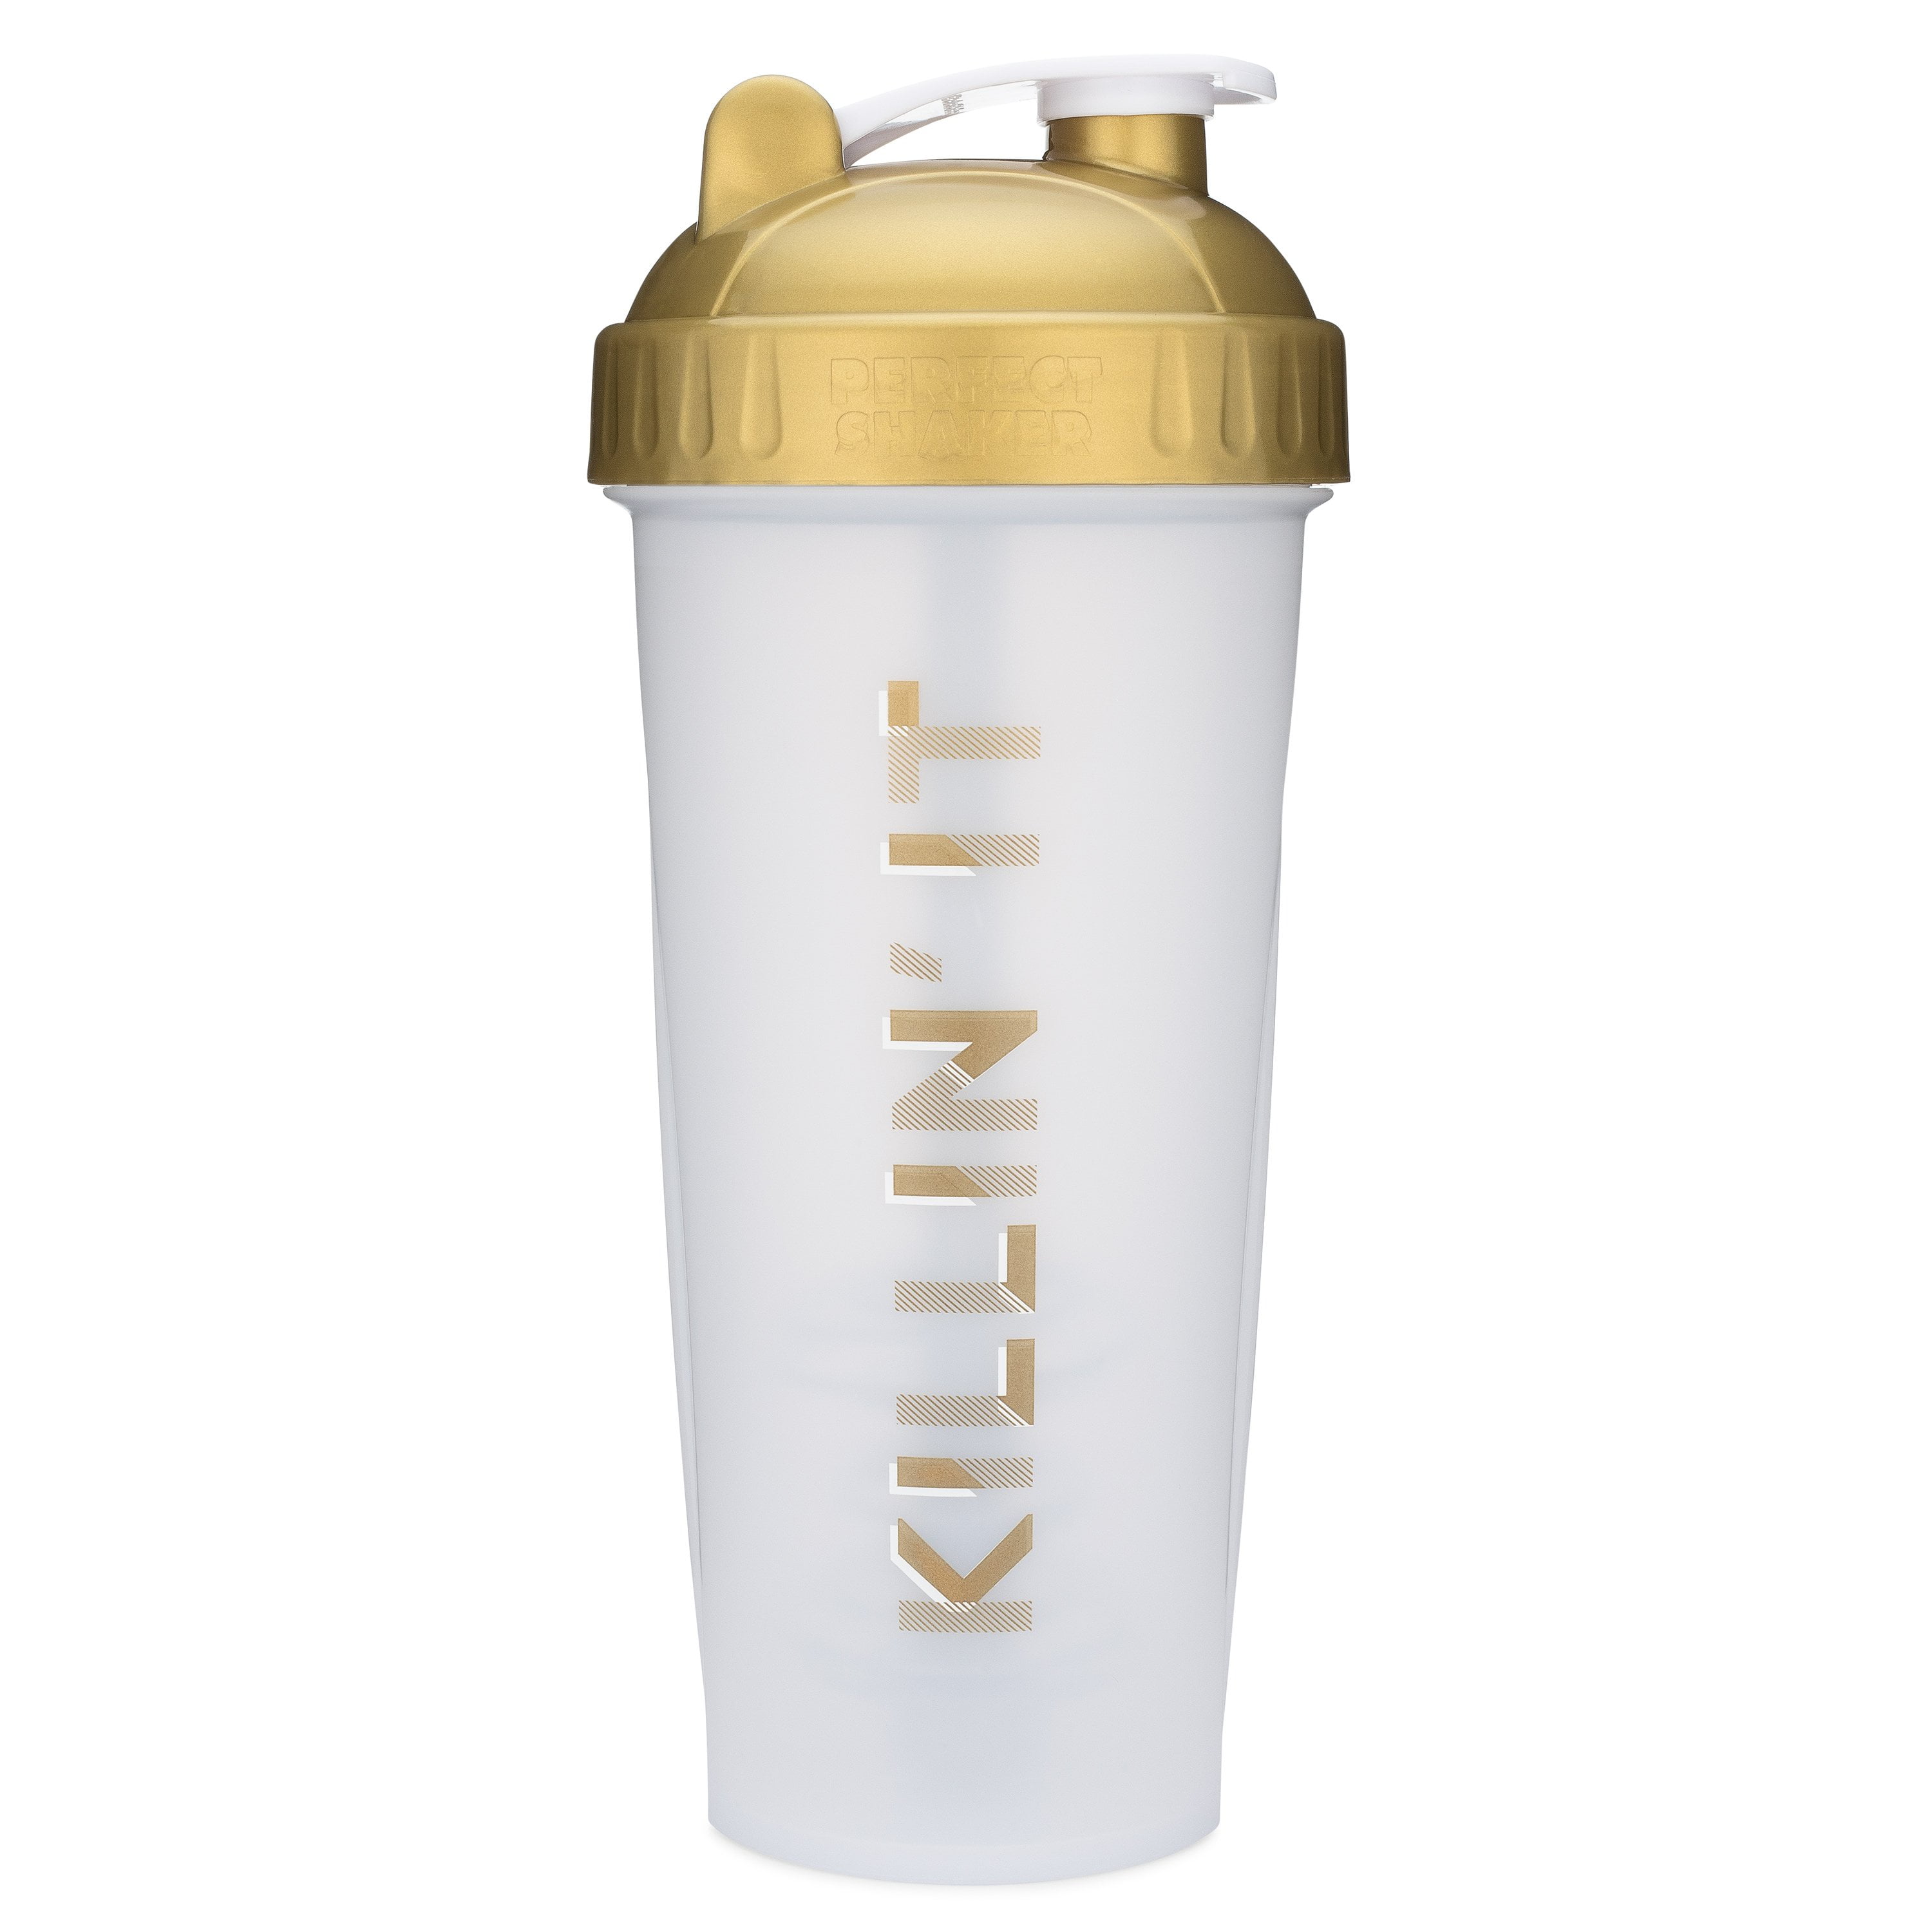 Killin' It Motivational Quote on Performa Perfect Shaker Bottle, 28 Ounce Protein  Shaker Cup, Dishwasher Safe, Leak Proof, Perfect Gym Fitness Gift 